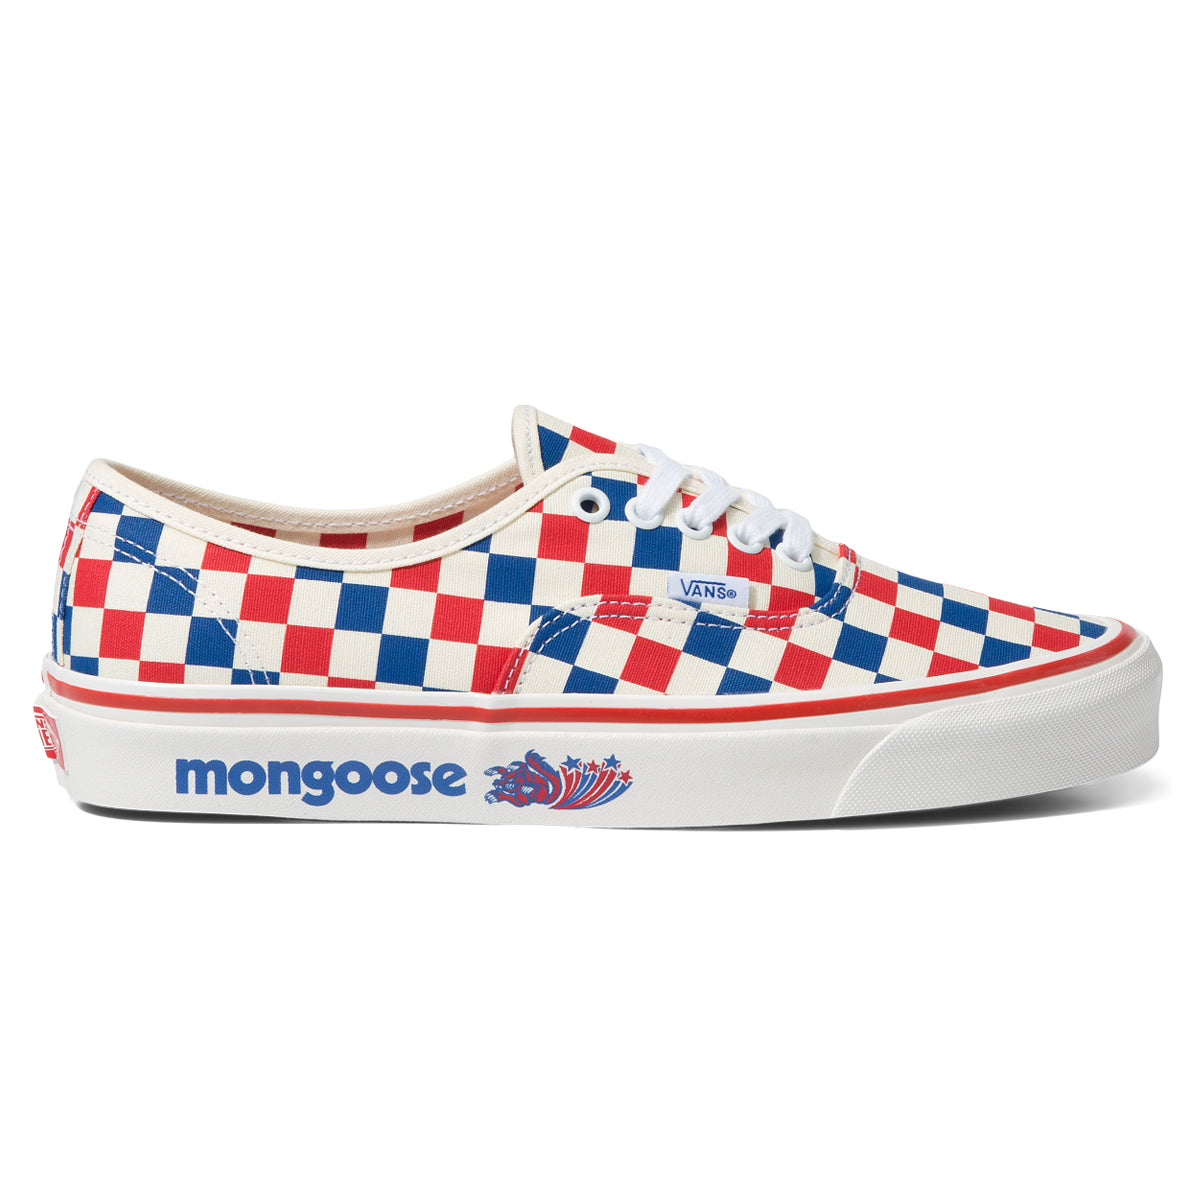 Inloggegevens Wegenbouwproces explosie VANS X MONGOOSE AUTHENTIC 44 DX OUR LEGENDS - RED BLUE – Reserve Supply  Company